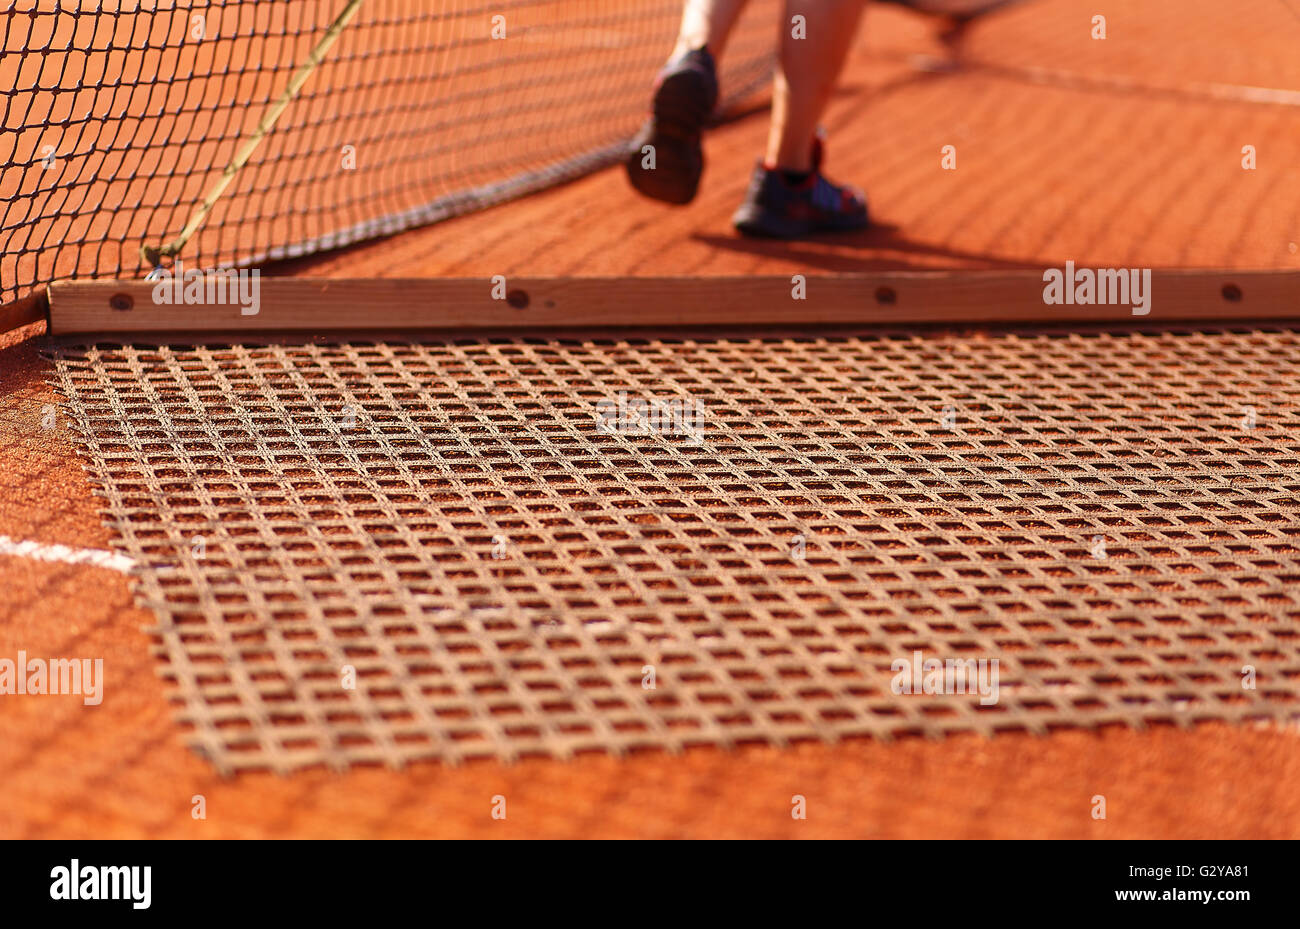 Aligning surface tennis court, with pulling network. Stock Photo